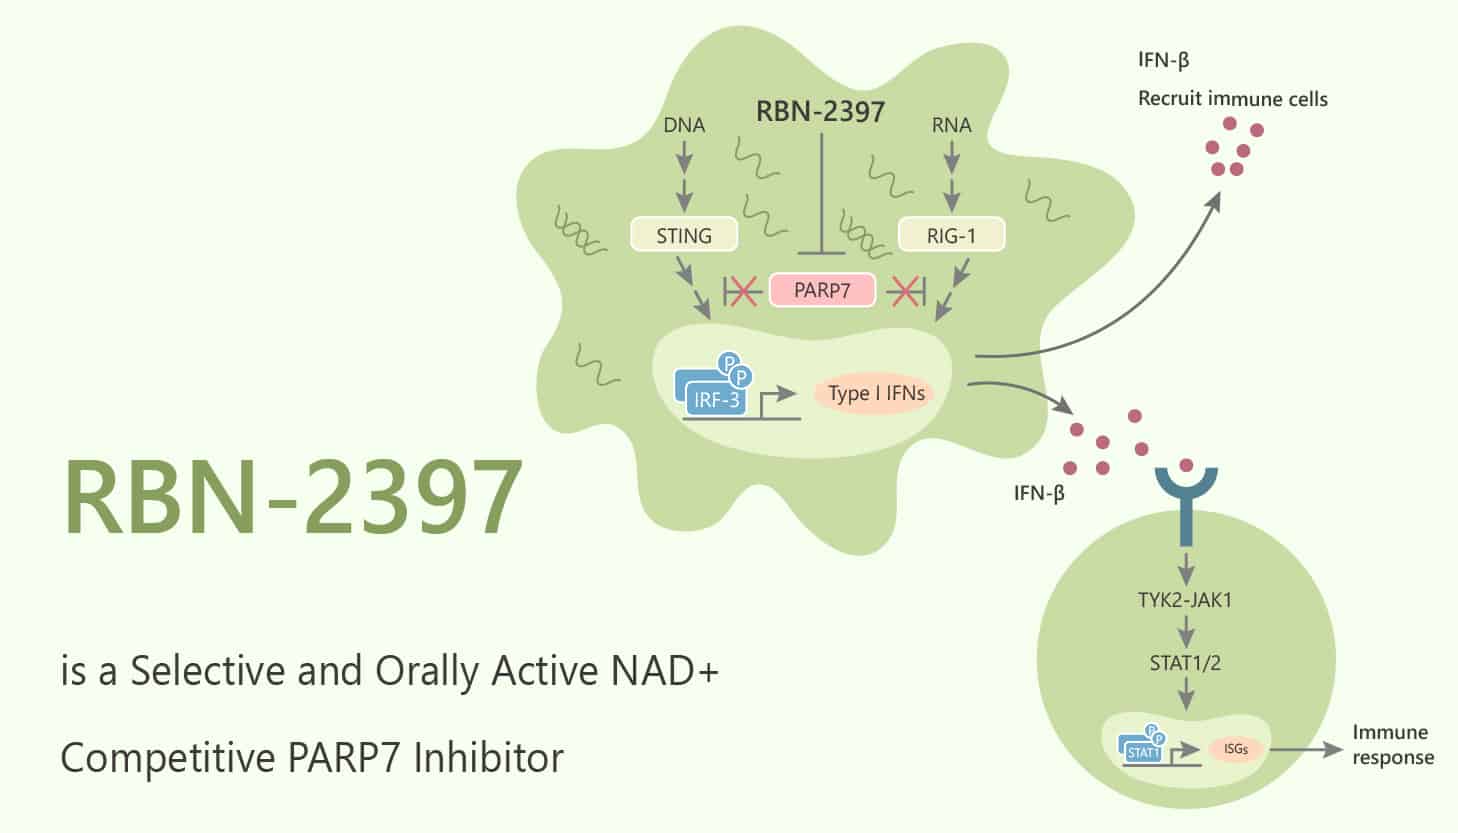 RBN-2397 is a Selective and Orally Active NAD+ Competitive PARP7 Inhibitor